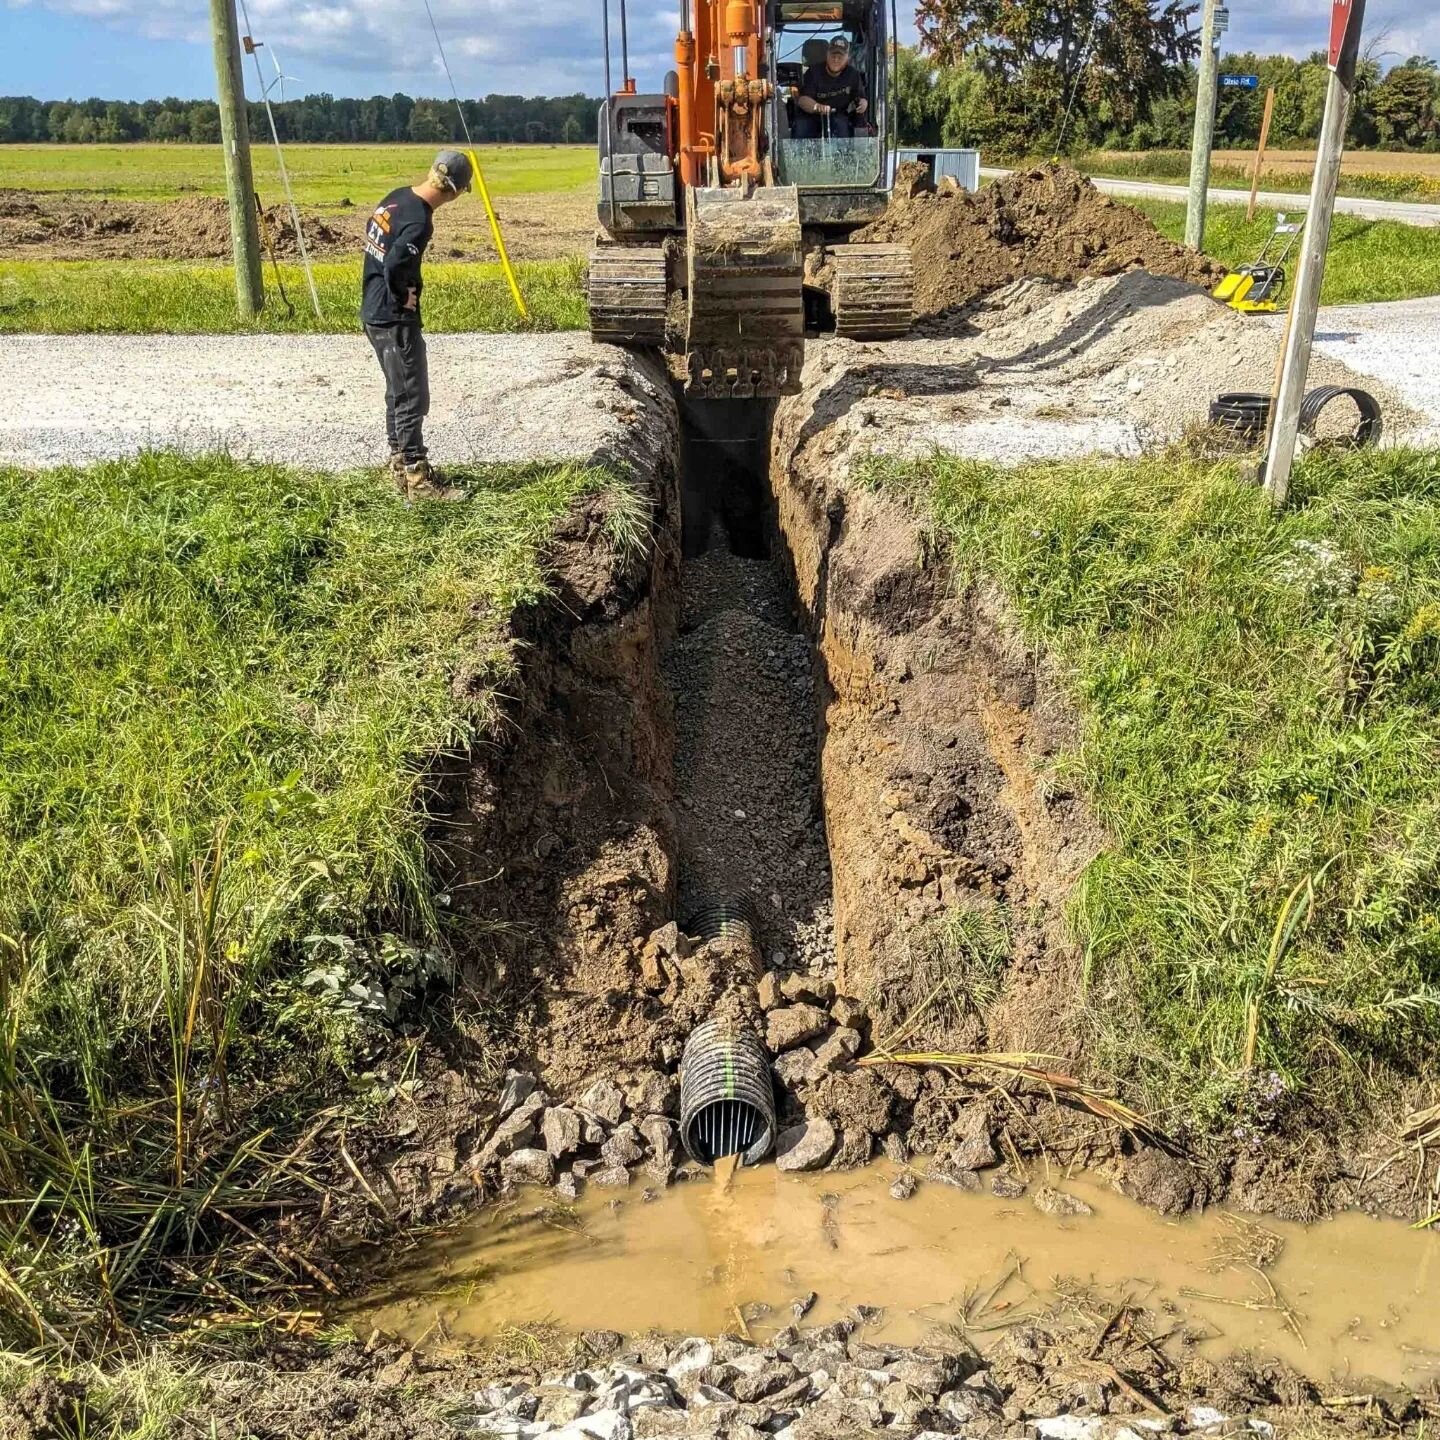 Blake Shelton says it best:

&quot;Yea, and what they call work, digging in the dirt
Gotta get it in the ground 'fore the rain come down&quot; 

GIve us a call while things AREN'T that busy to make sure jobs like this get done before things GET busy.